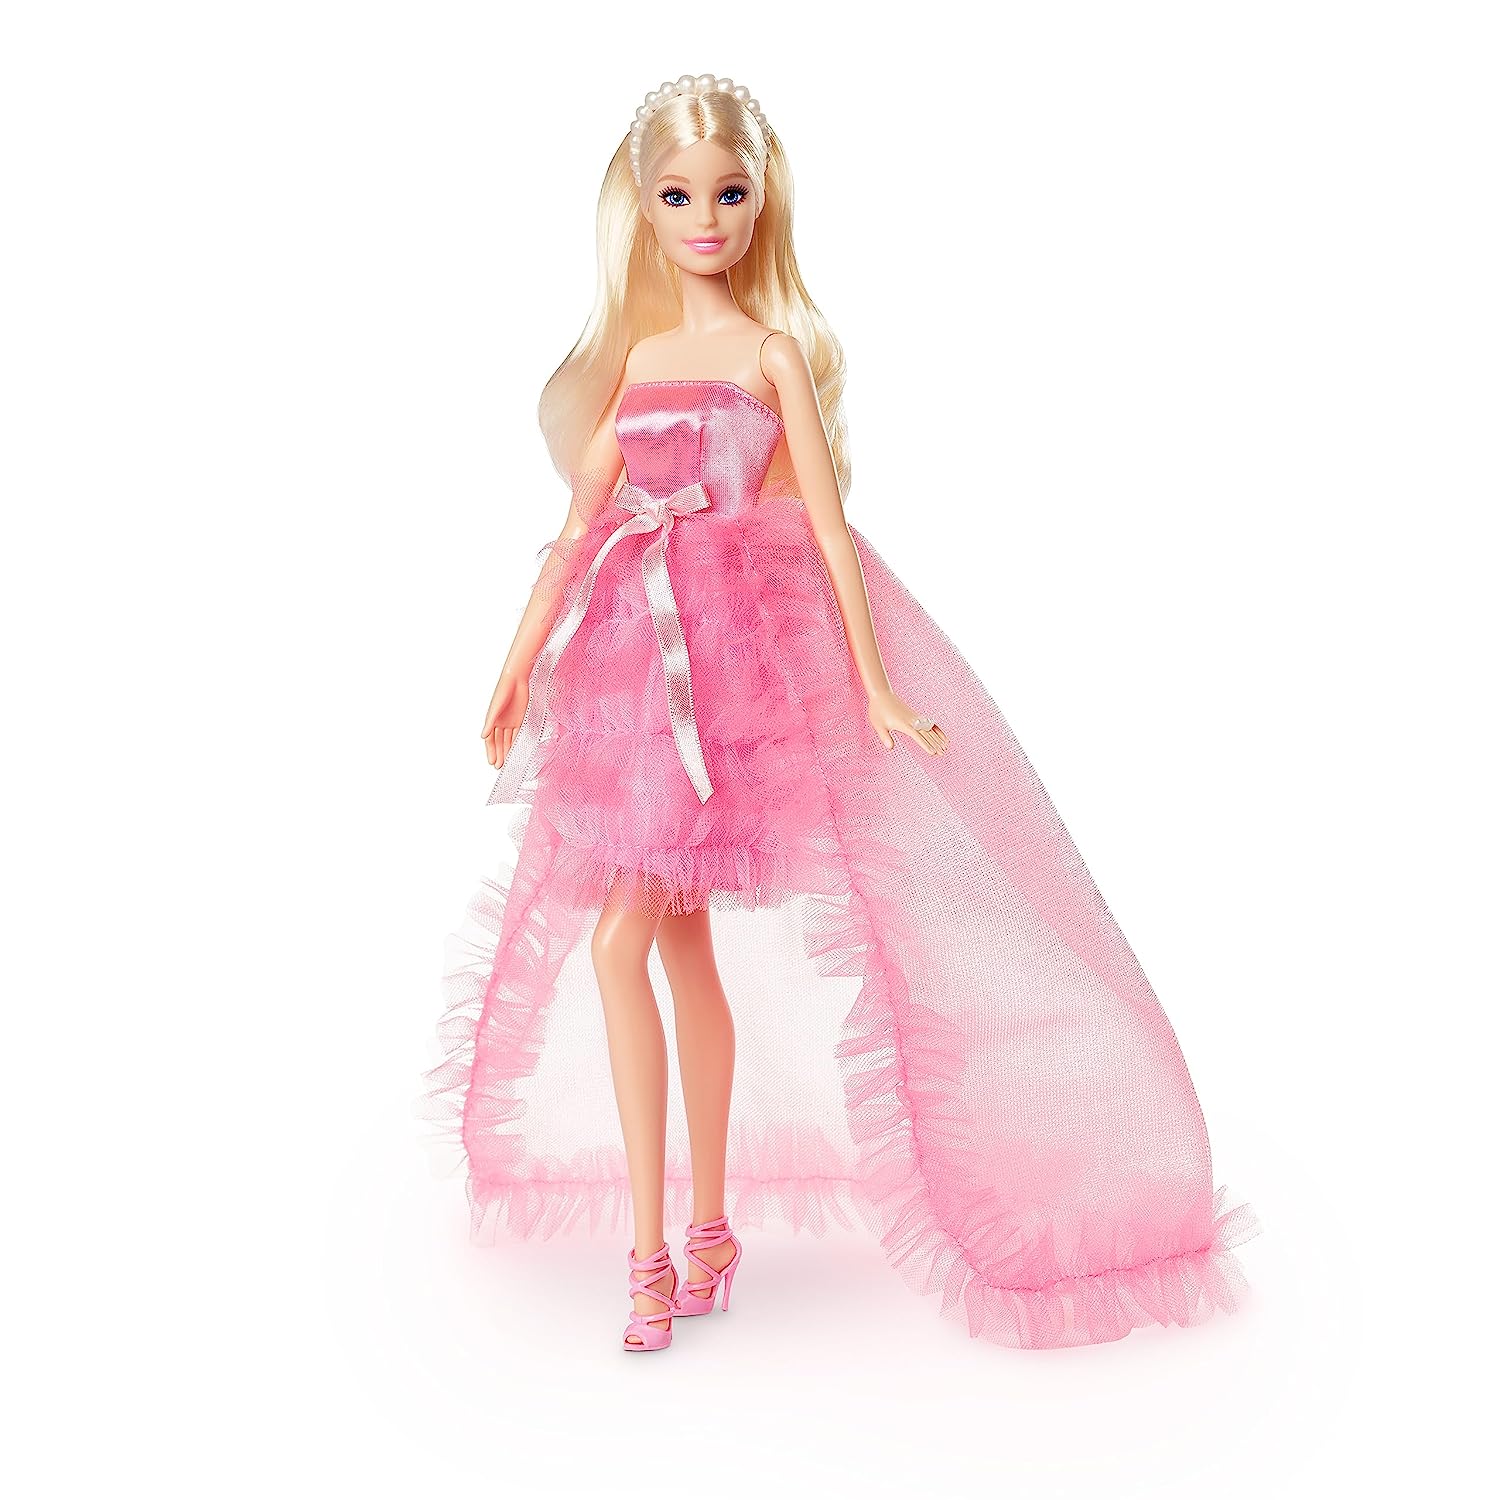 Buy Barbie Birthday Wishes Blonde Doll in Pink Satin and Tulle Dress ...